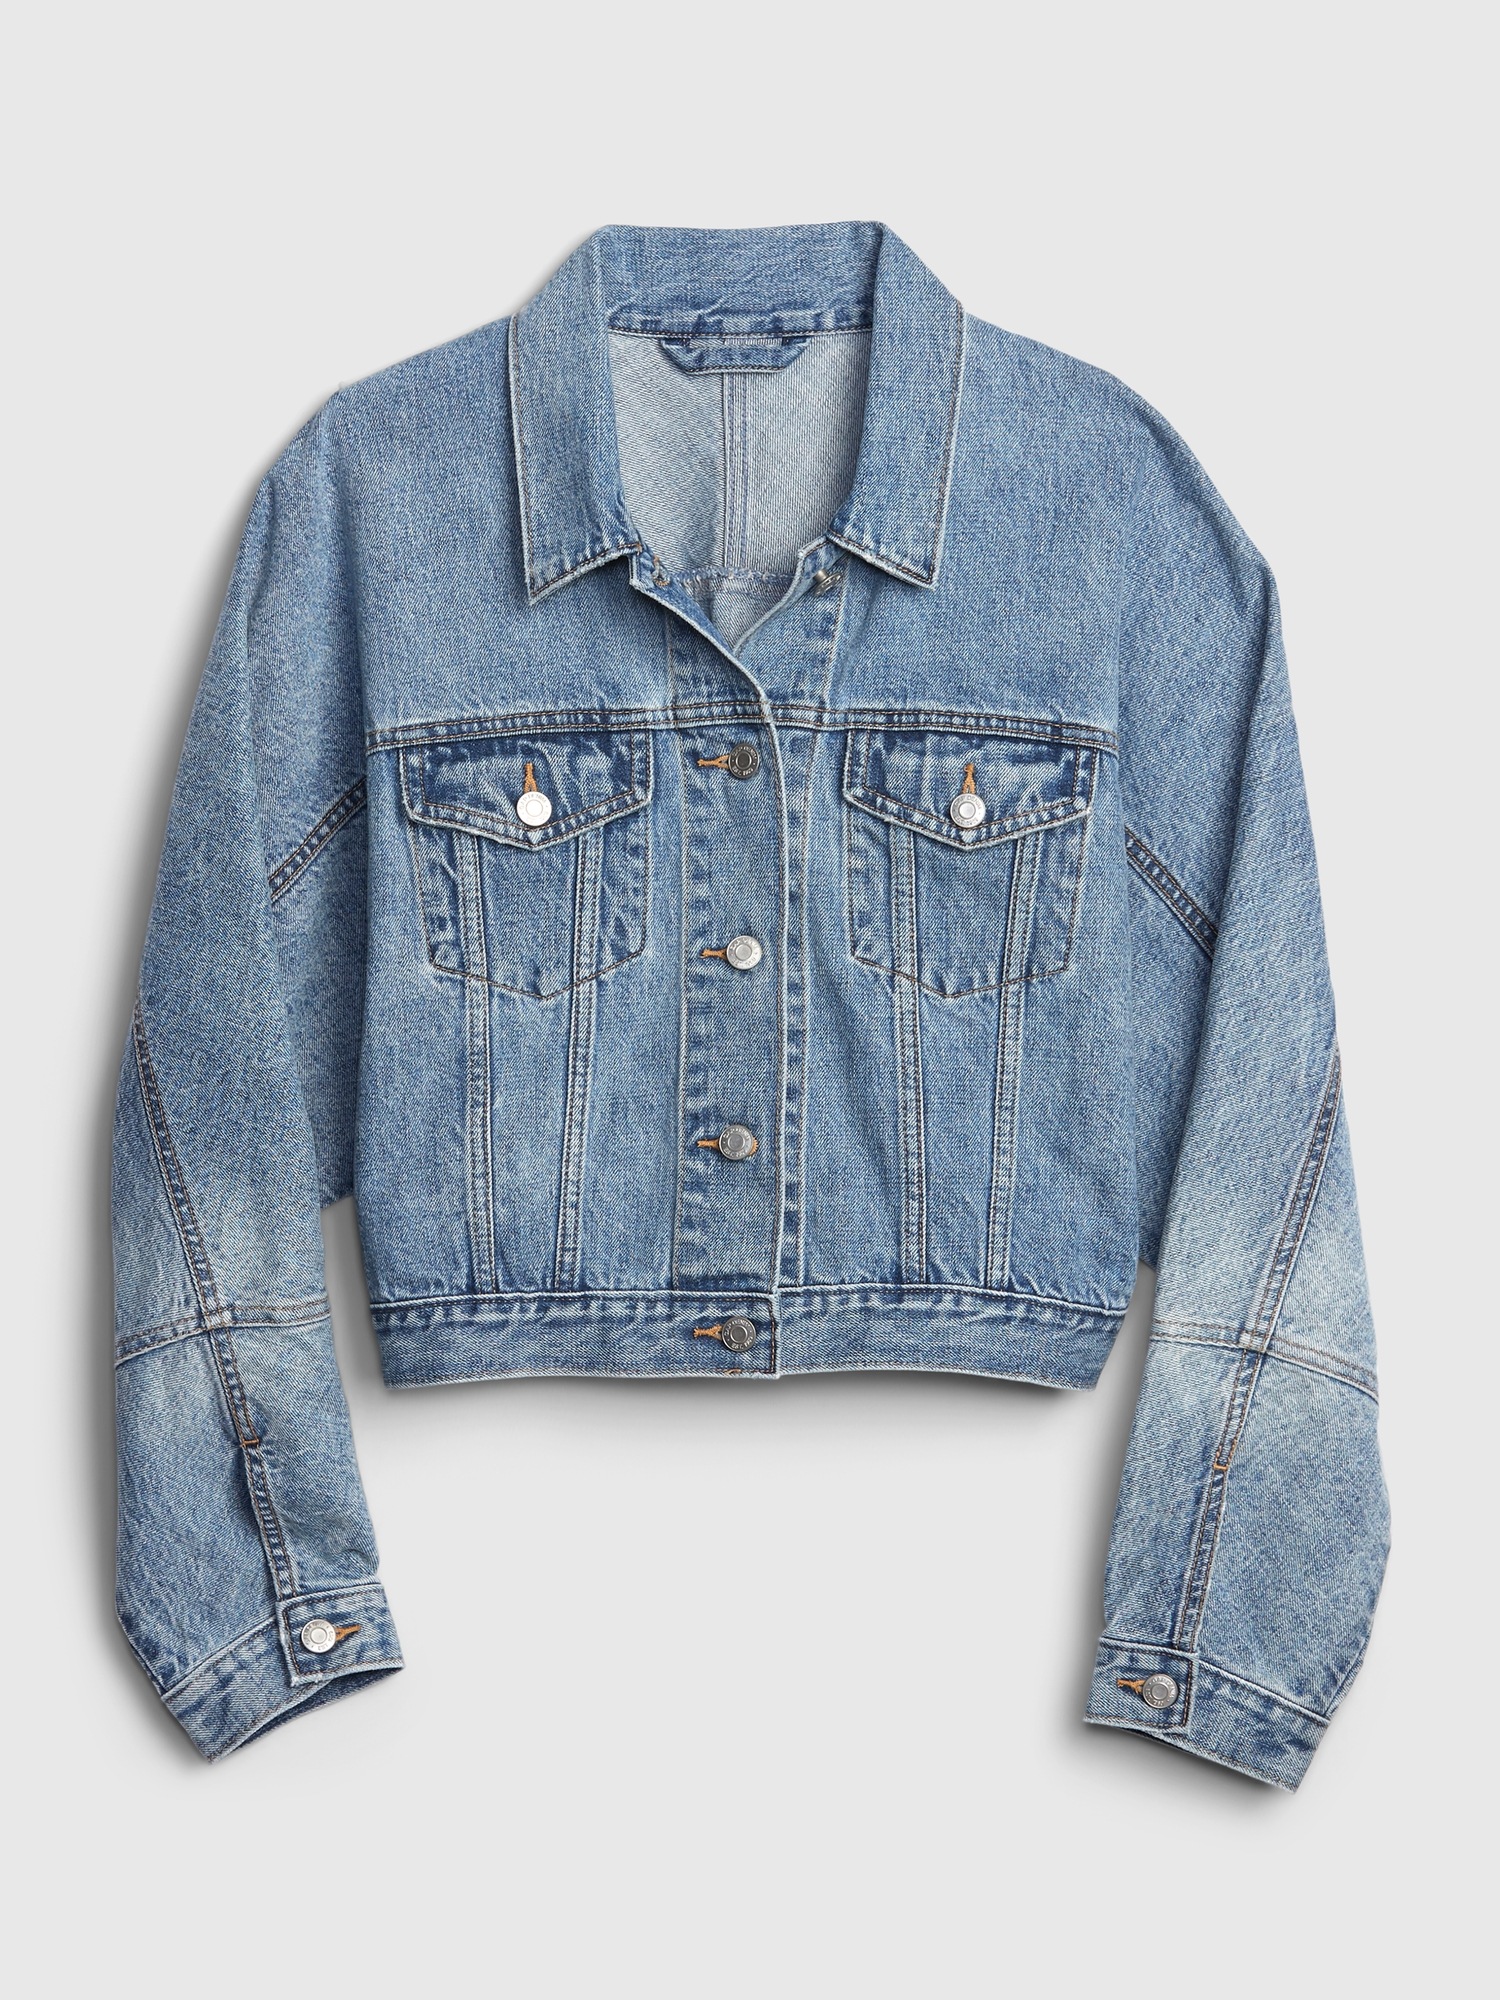 A Gap Jean Jacket Is the Travel Essential I Can't Live Without